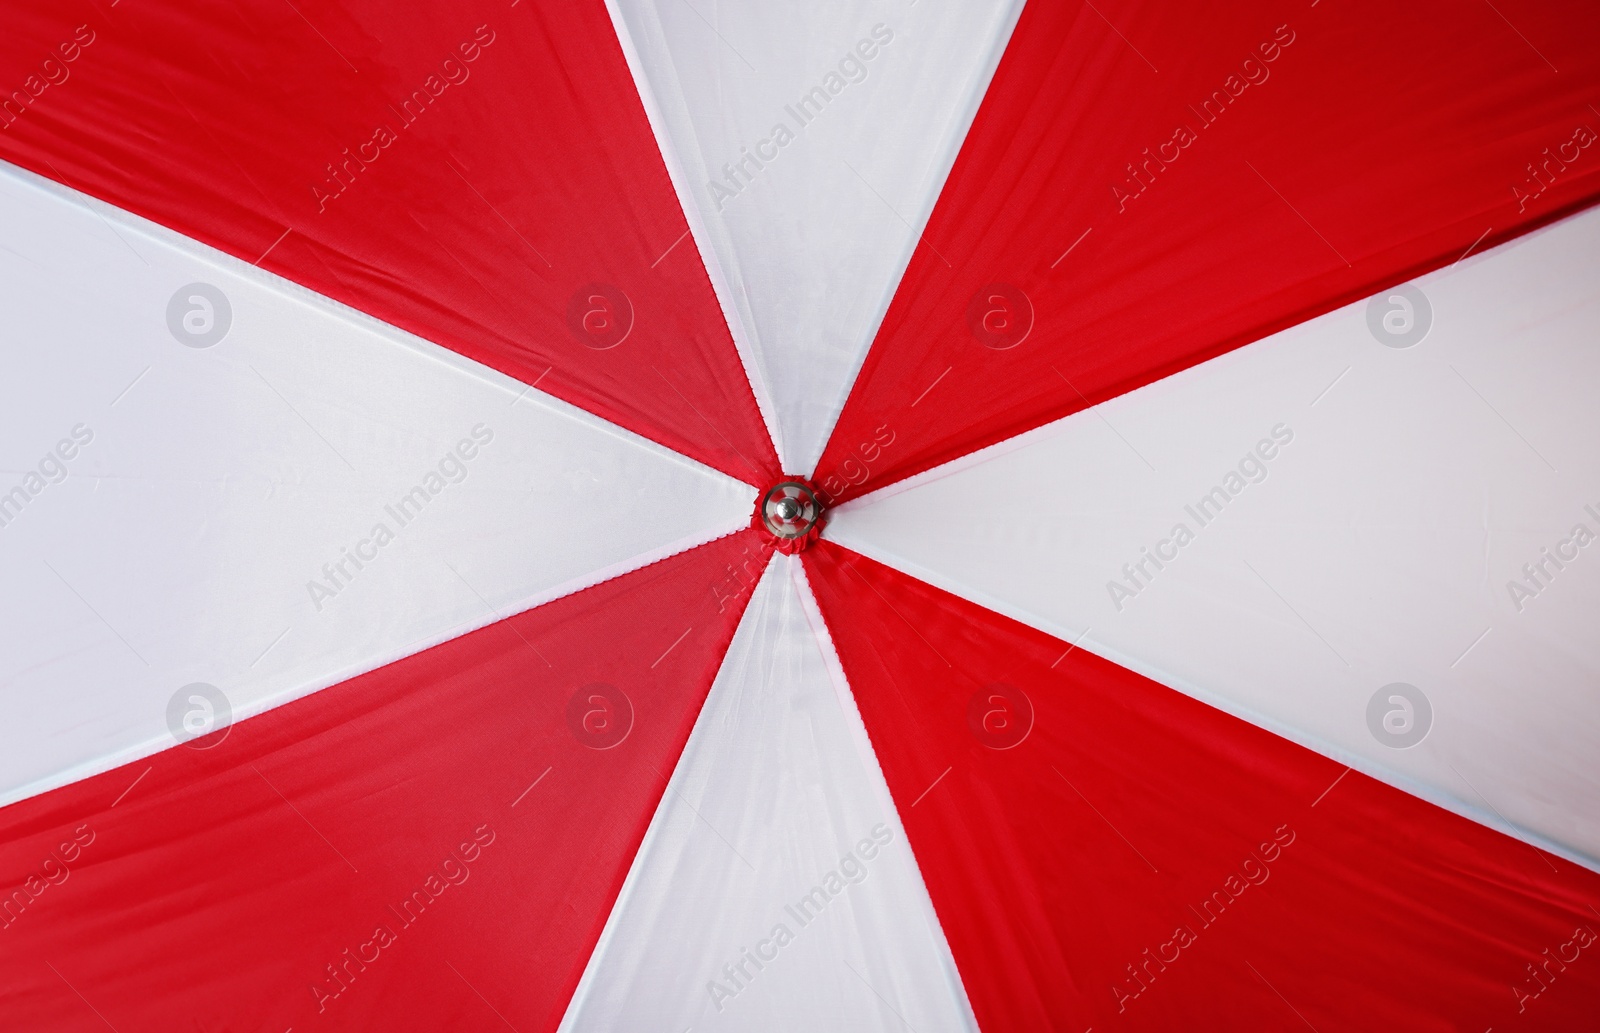 Image of Bright red and white umbrella as background, closeup